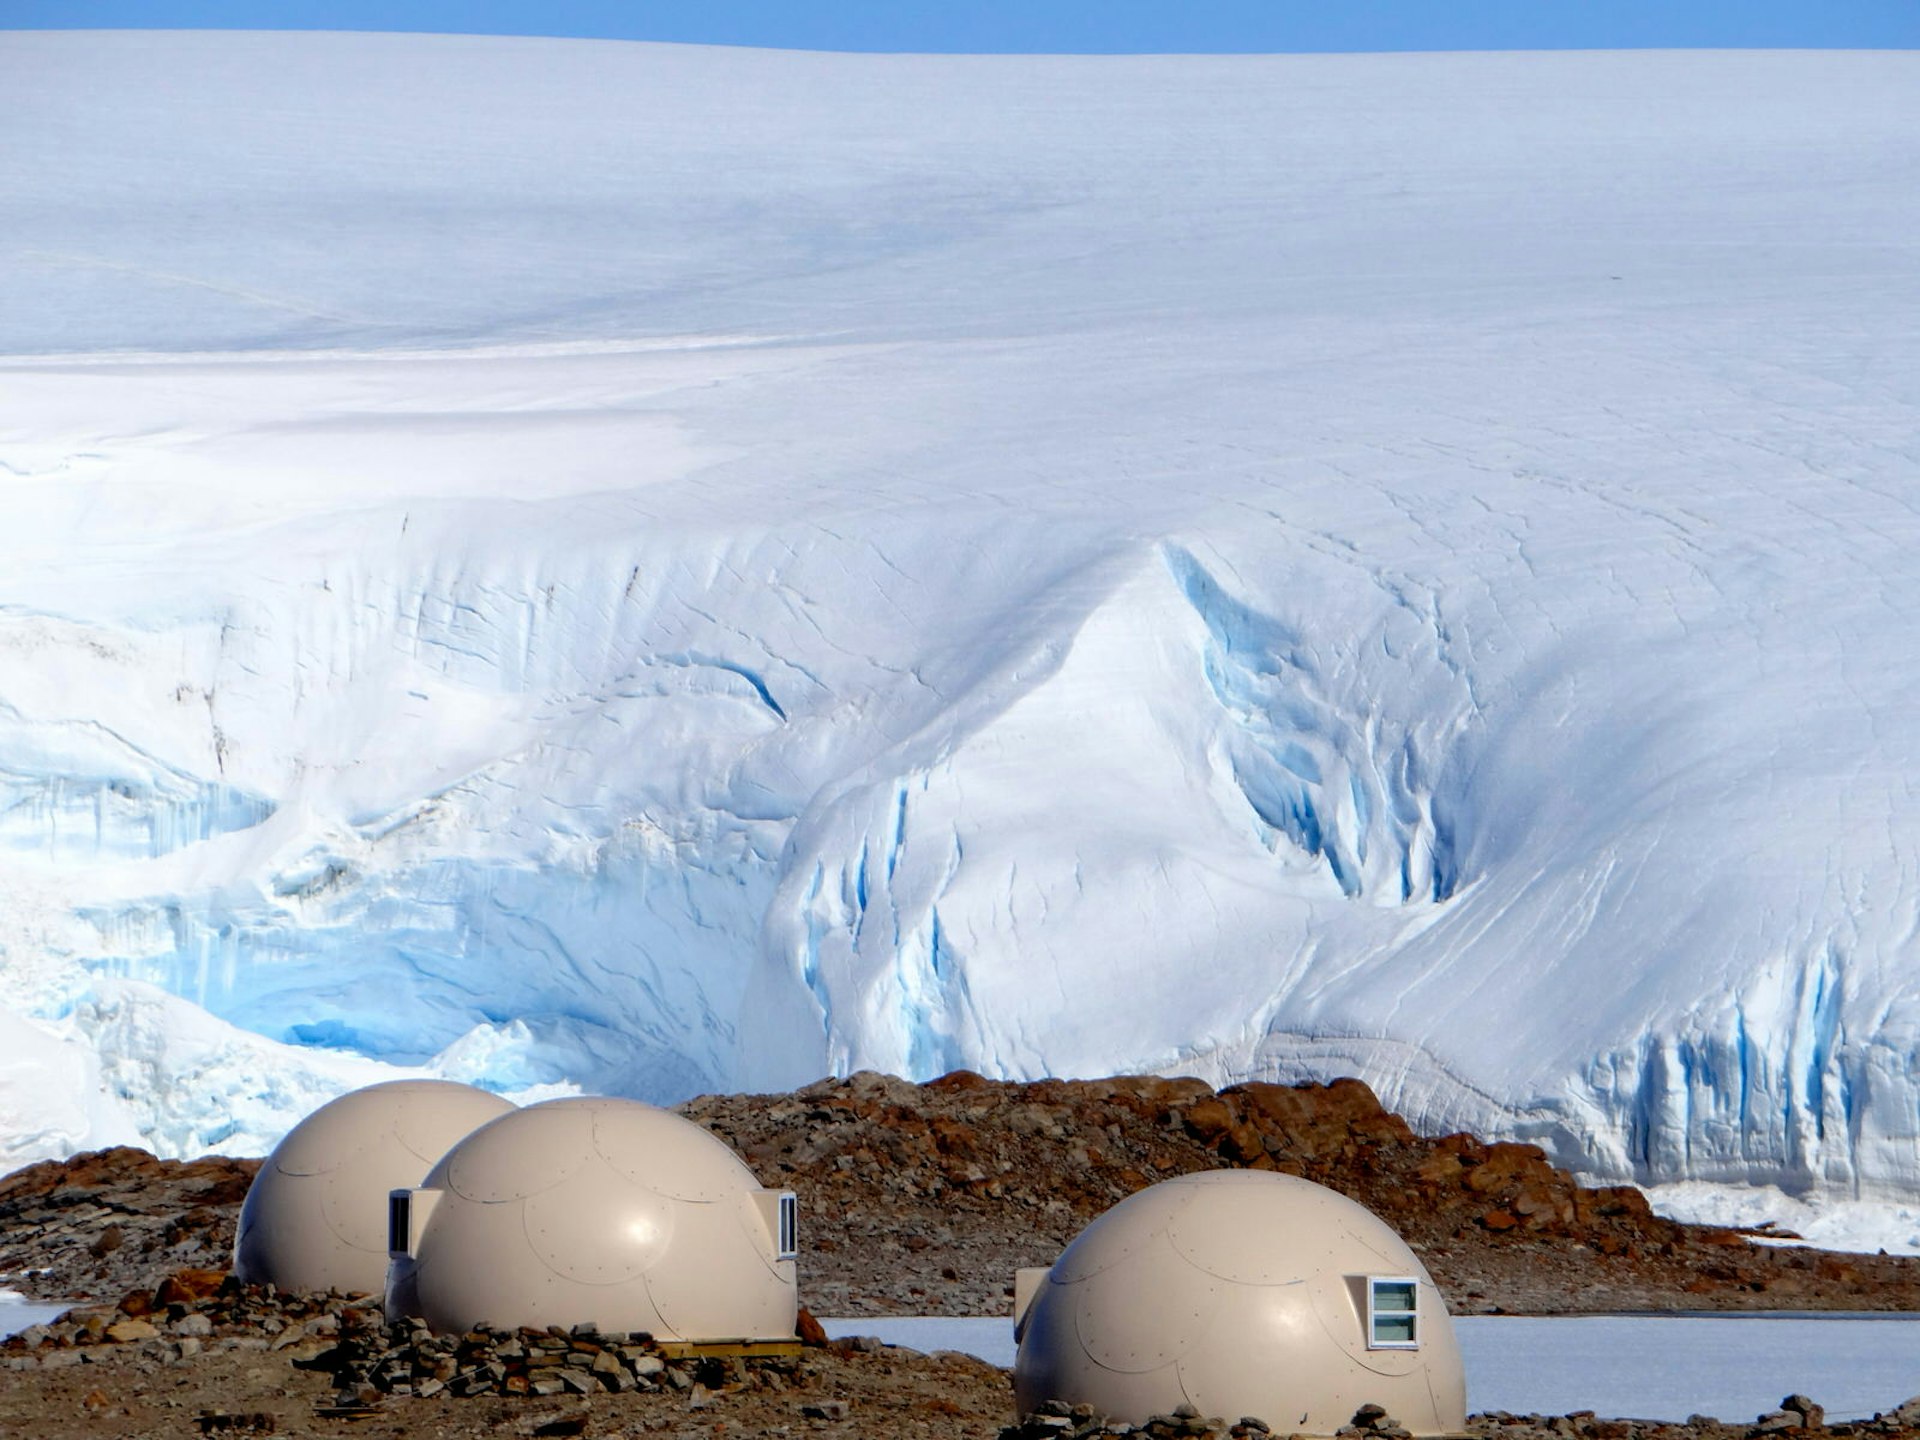 Cream-coloured domes stand in the Antarctica, with huge icebergs in the background.